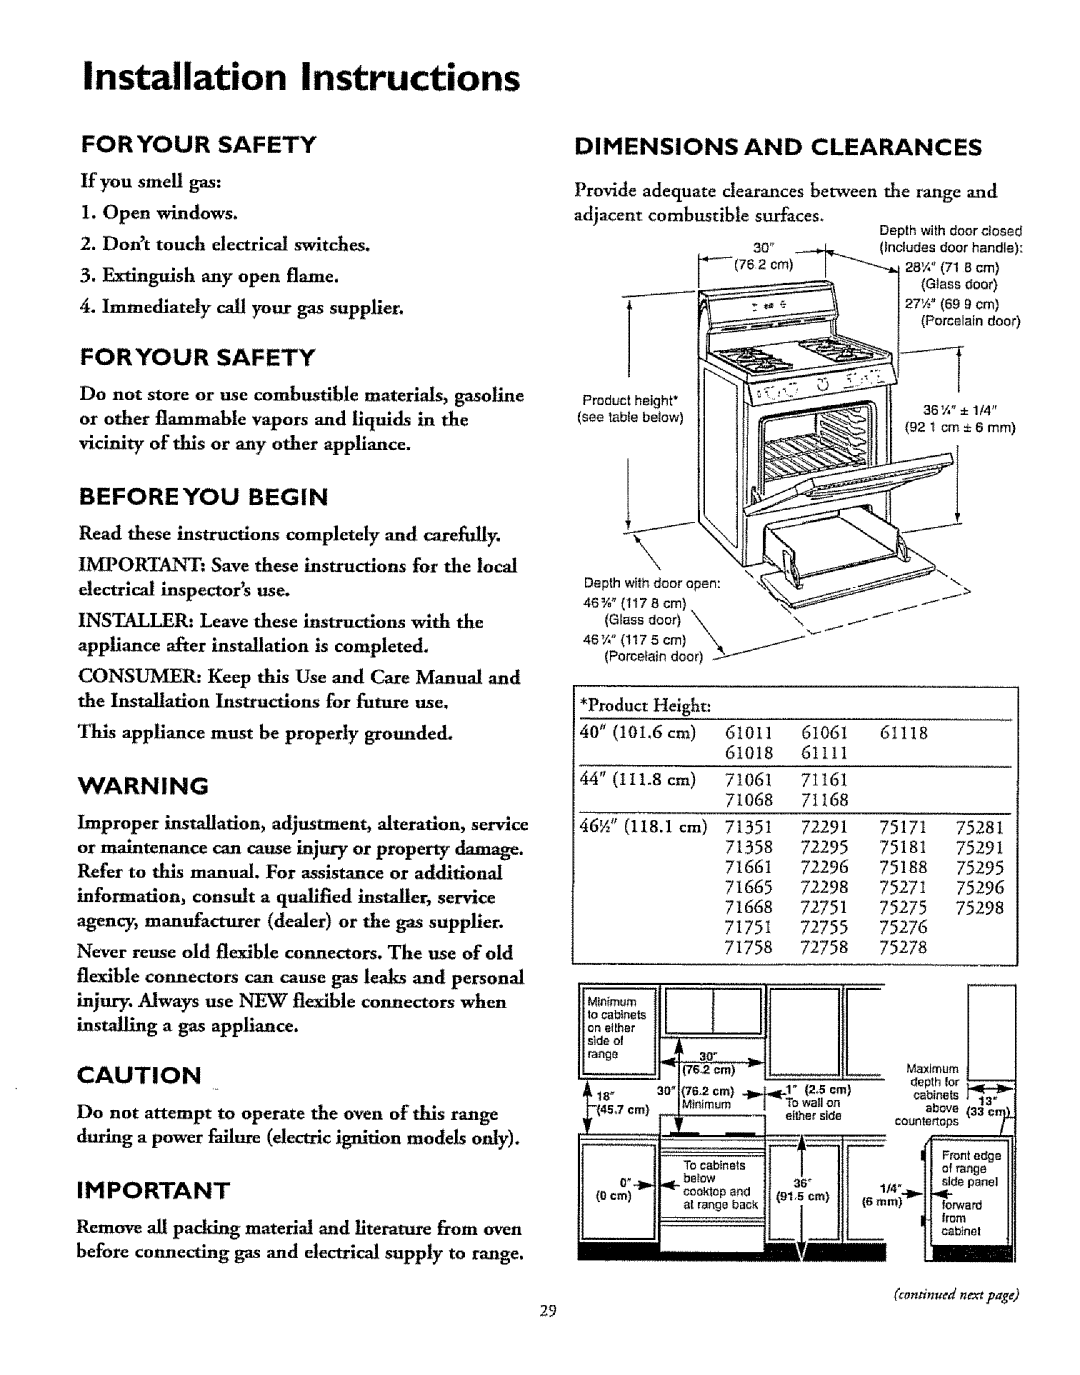 Sears 61018 Installation Instructions, Ihportant, Foryour Safety, Dihensions And Clearances, For Your Safety, Open windows 